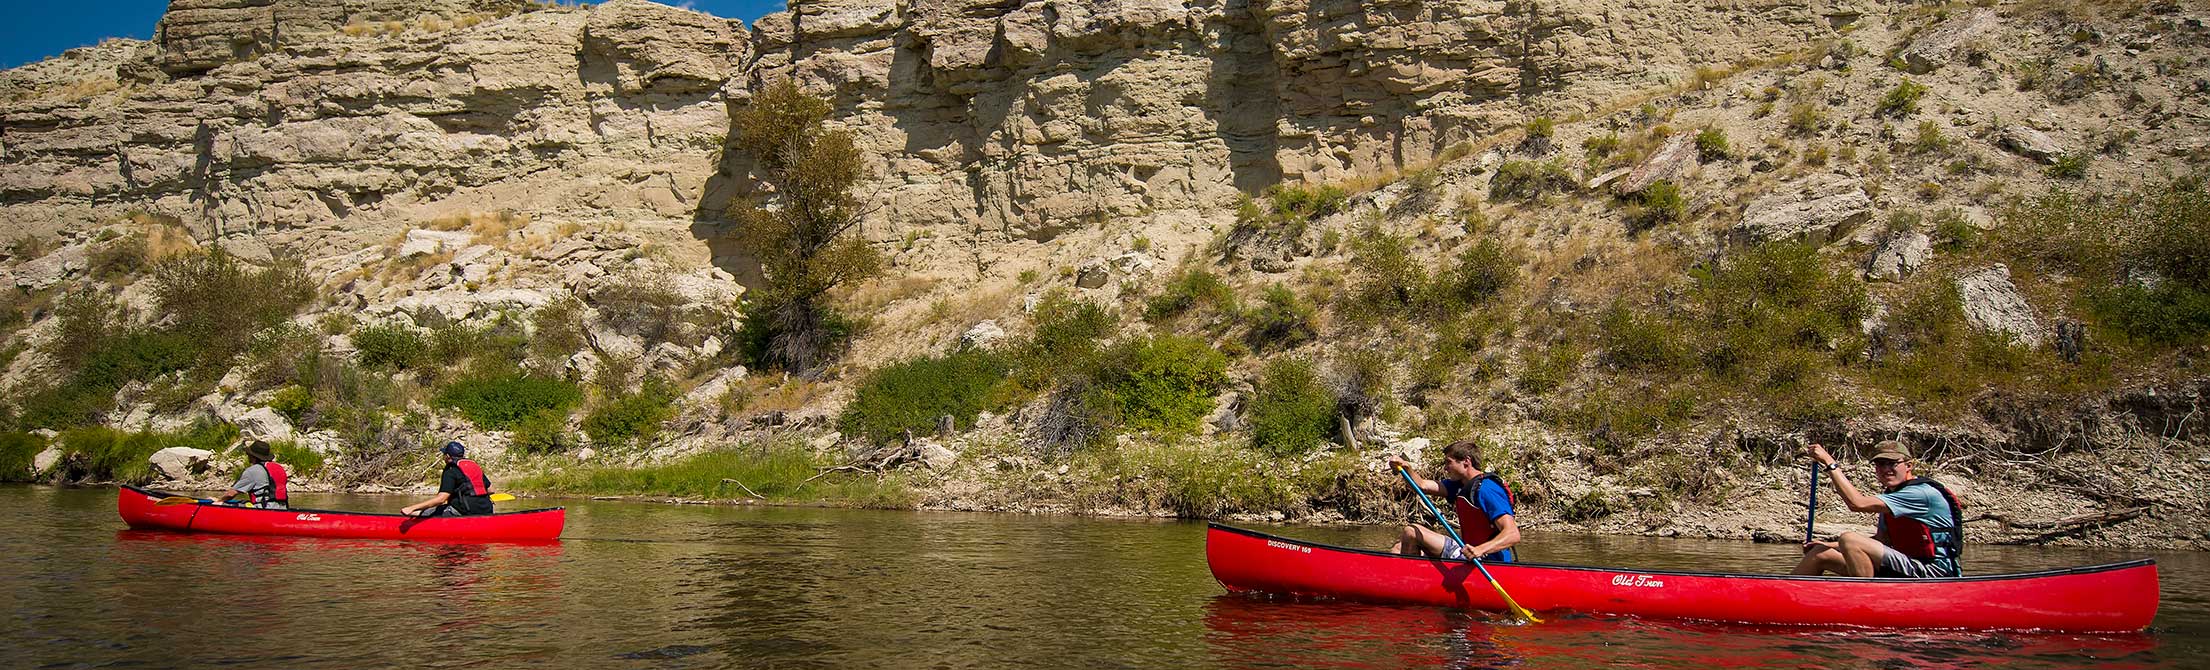 Students canoeing on the Platte River